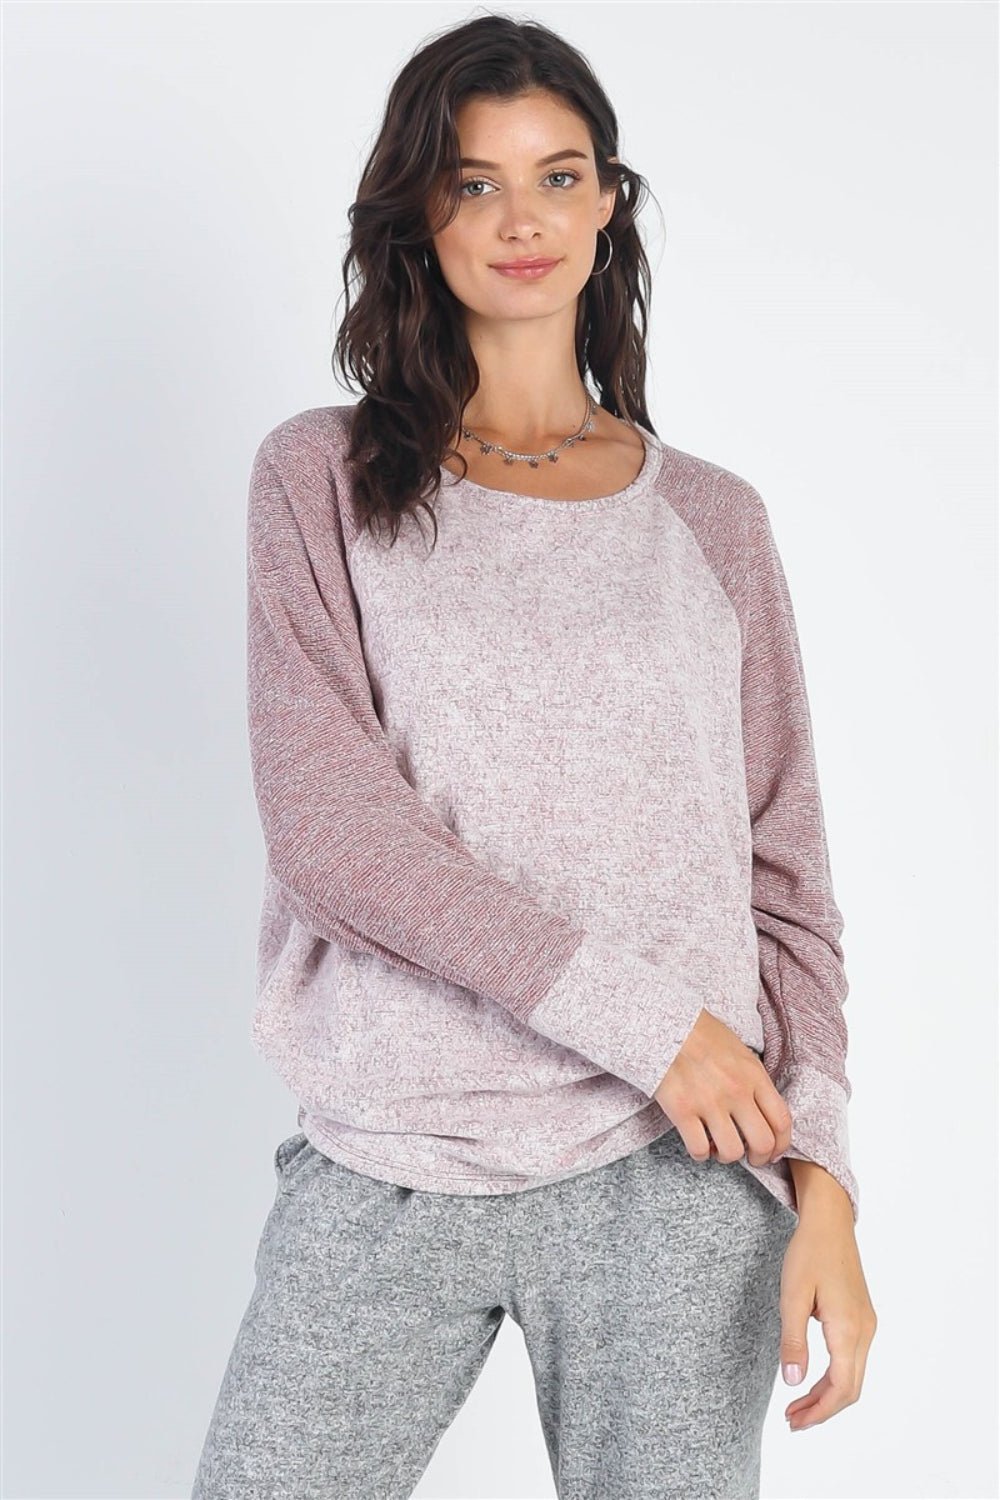 Cherish Apparel Round Neck Long Sleeve Contrast Top - Happily Ever Atchison Shop Co.